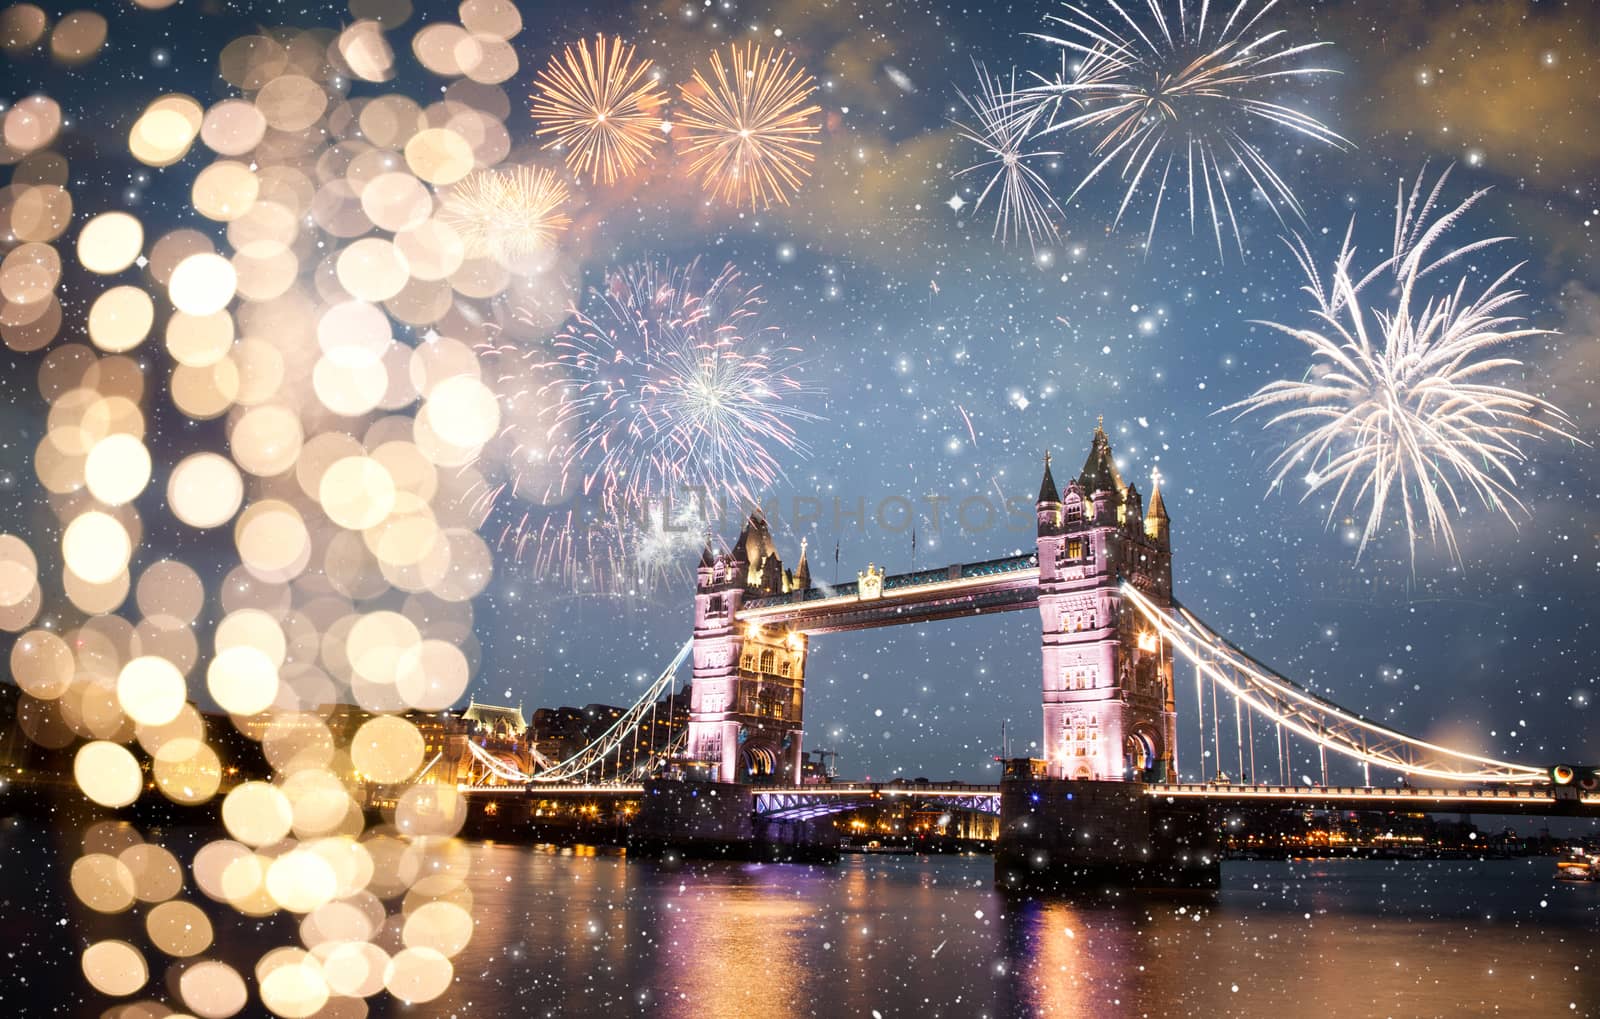 tower bridge with fireworks  celebration of the New Year in Lond by melis